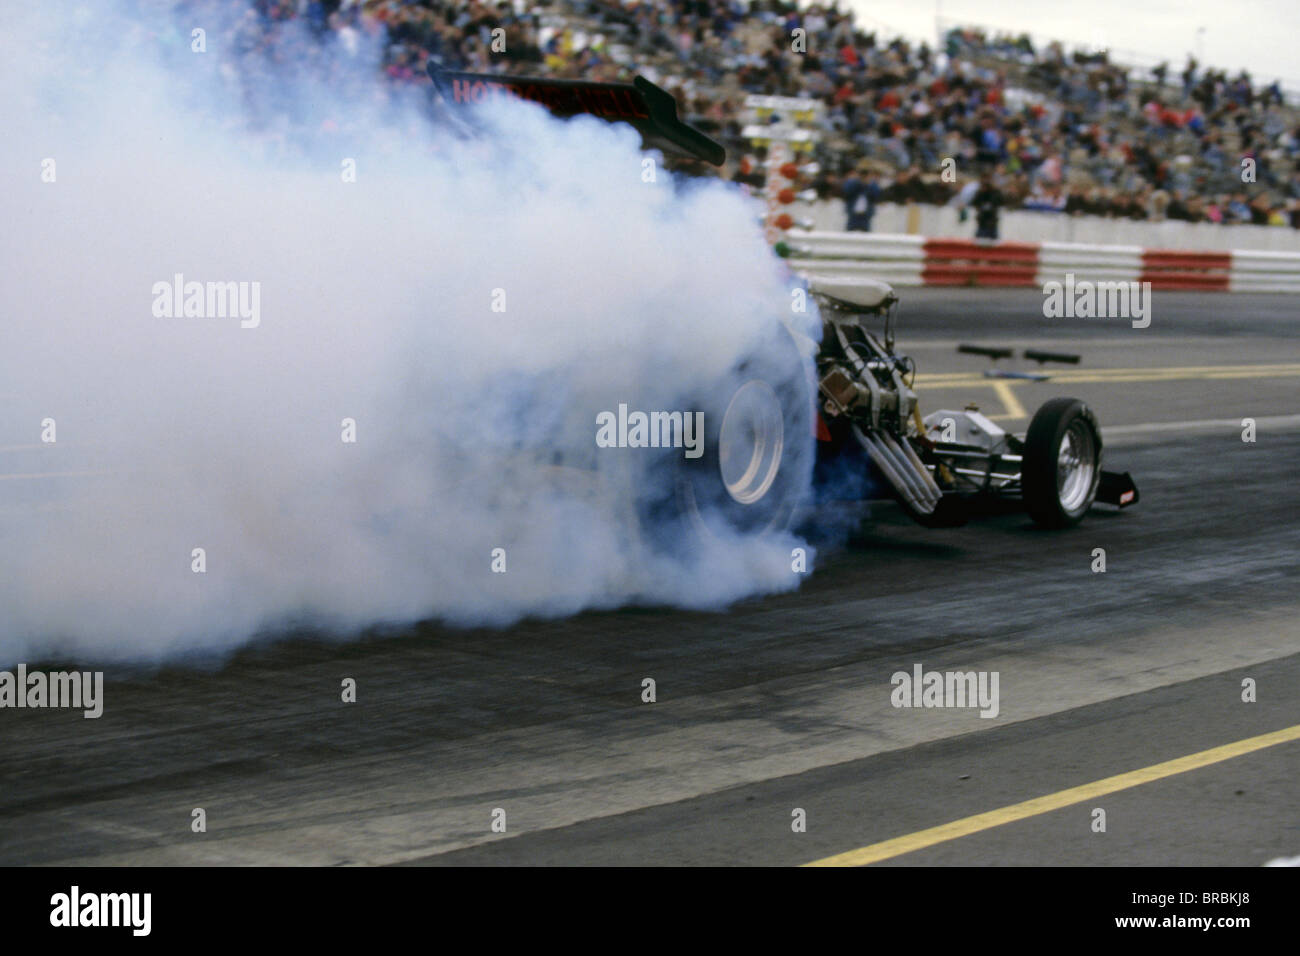 Top Fuel Car leaving starting line at a drag race Stock Photo